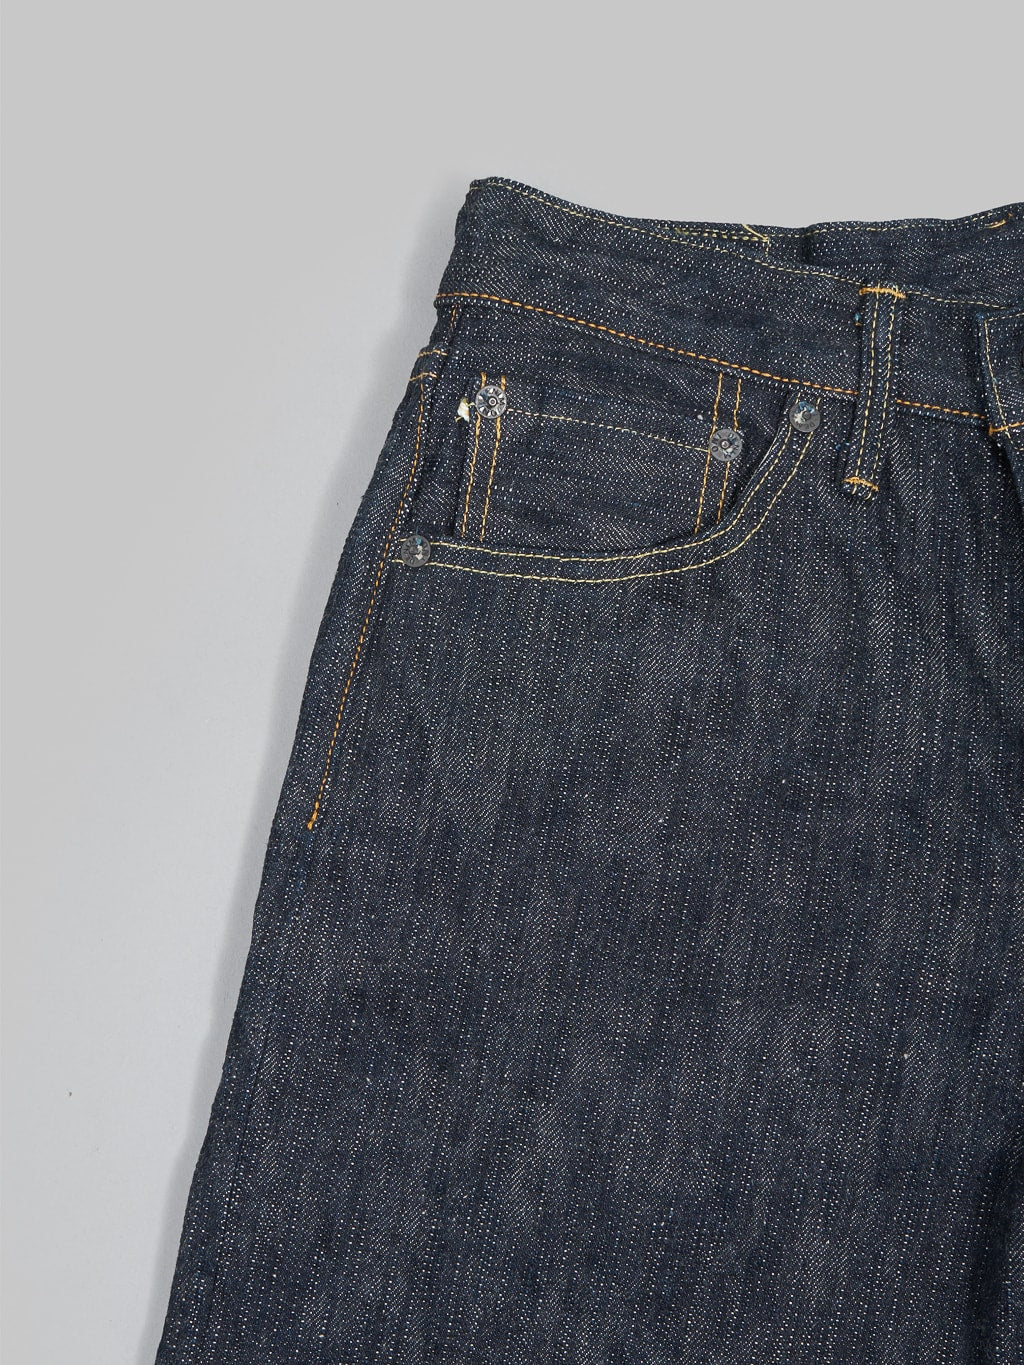 Oni denim kihannen relaxed tapered jeans coin pocket